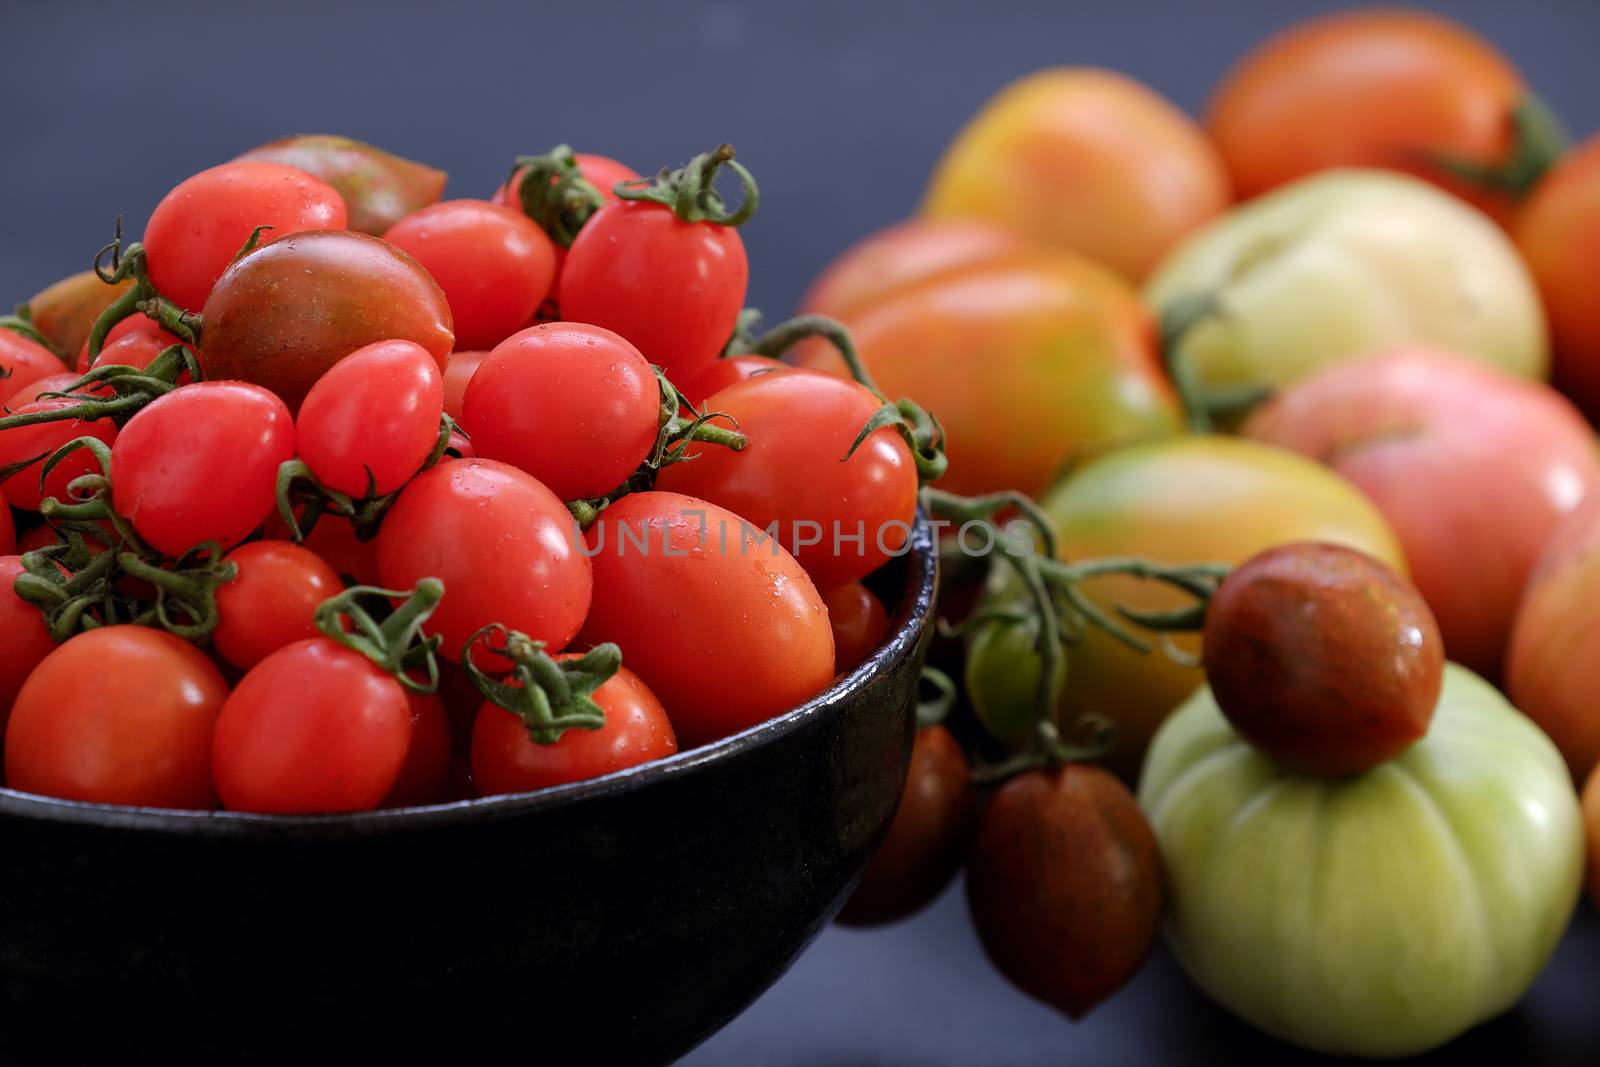 Collect of tomatoes, cheap food anticancer by xuanhuongho